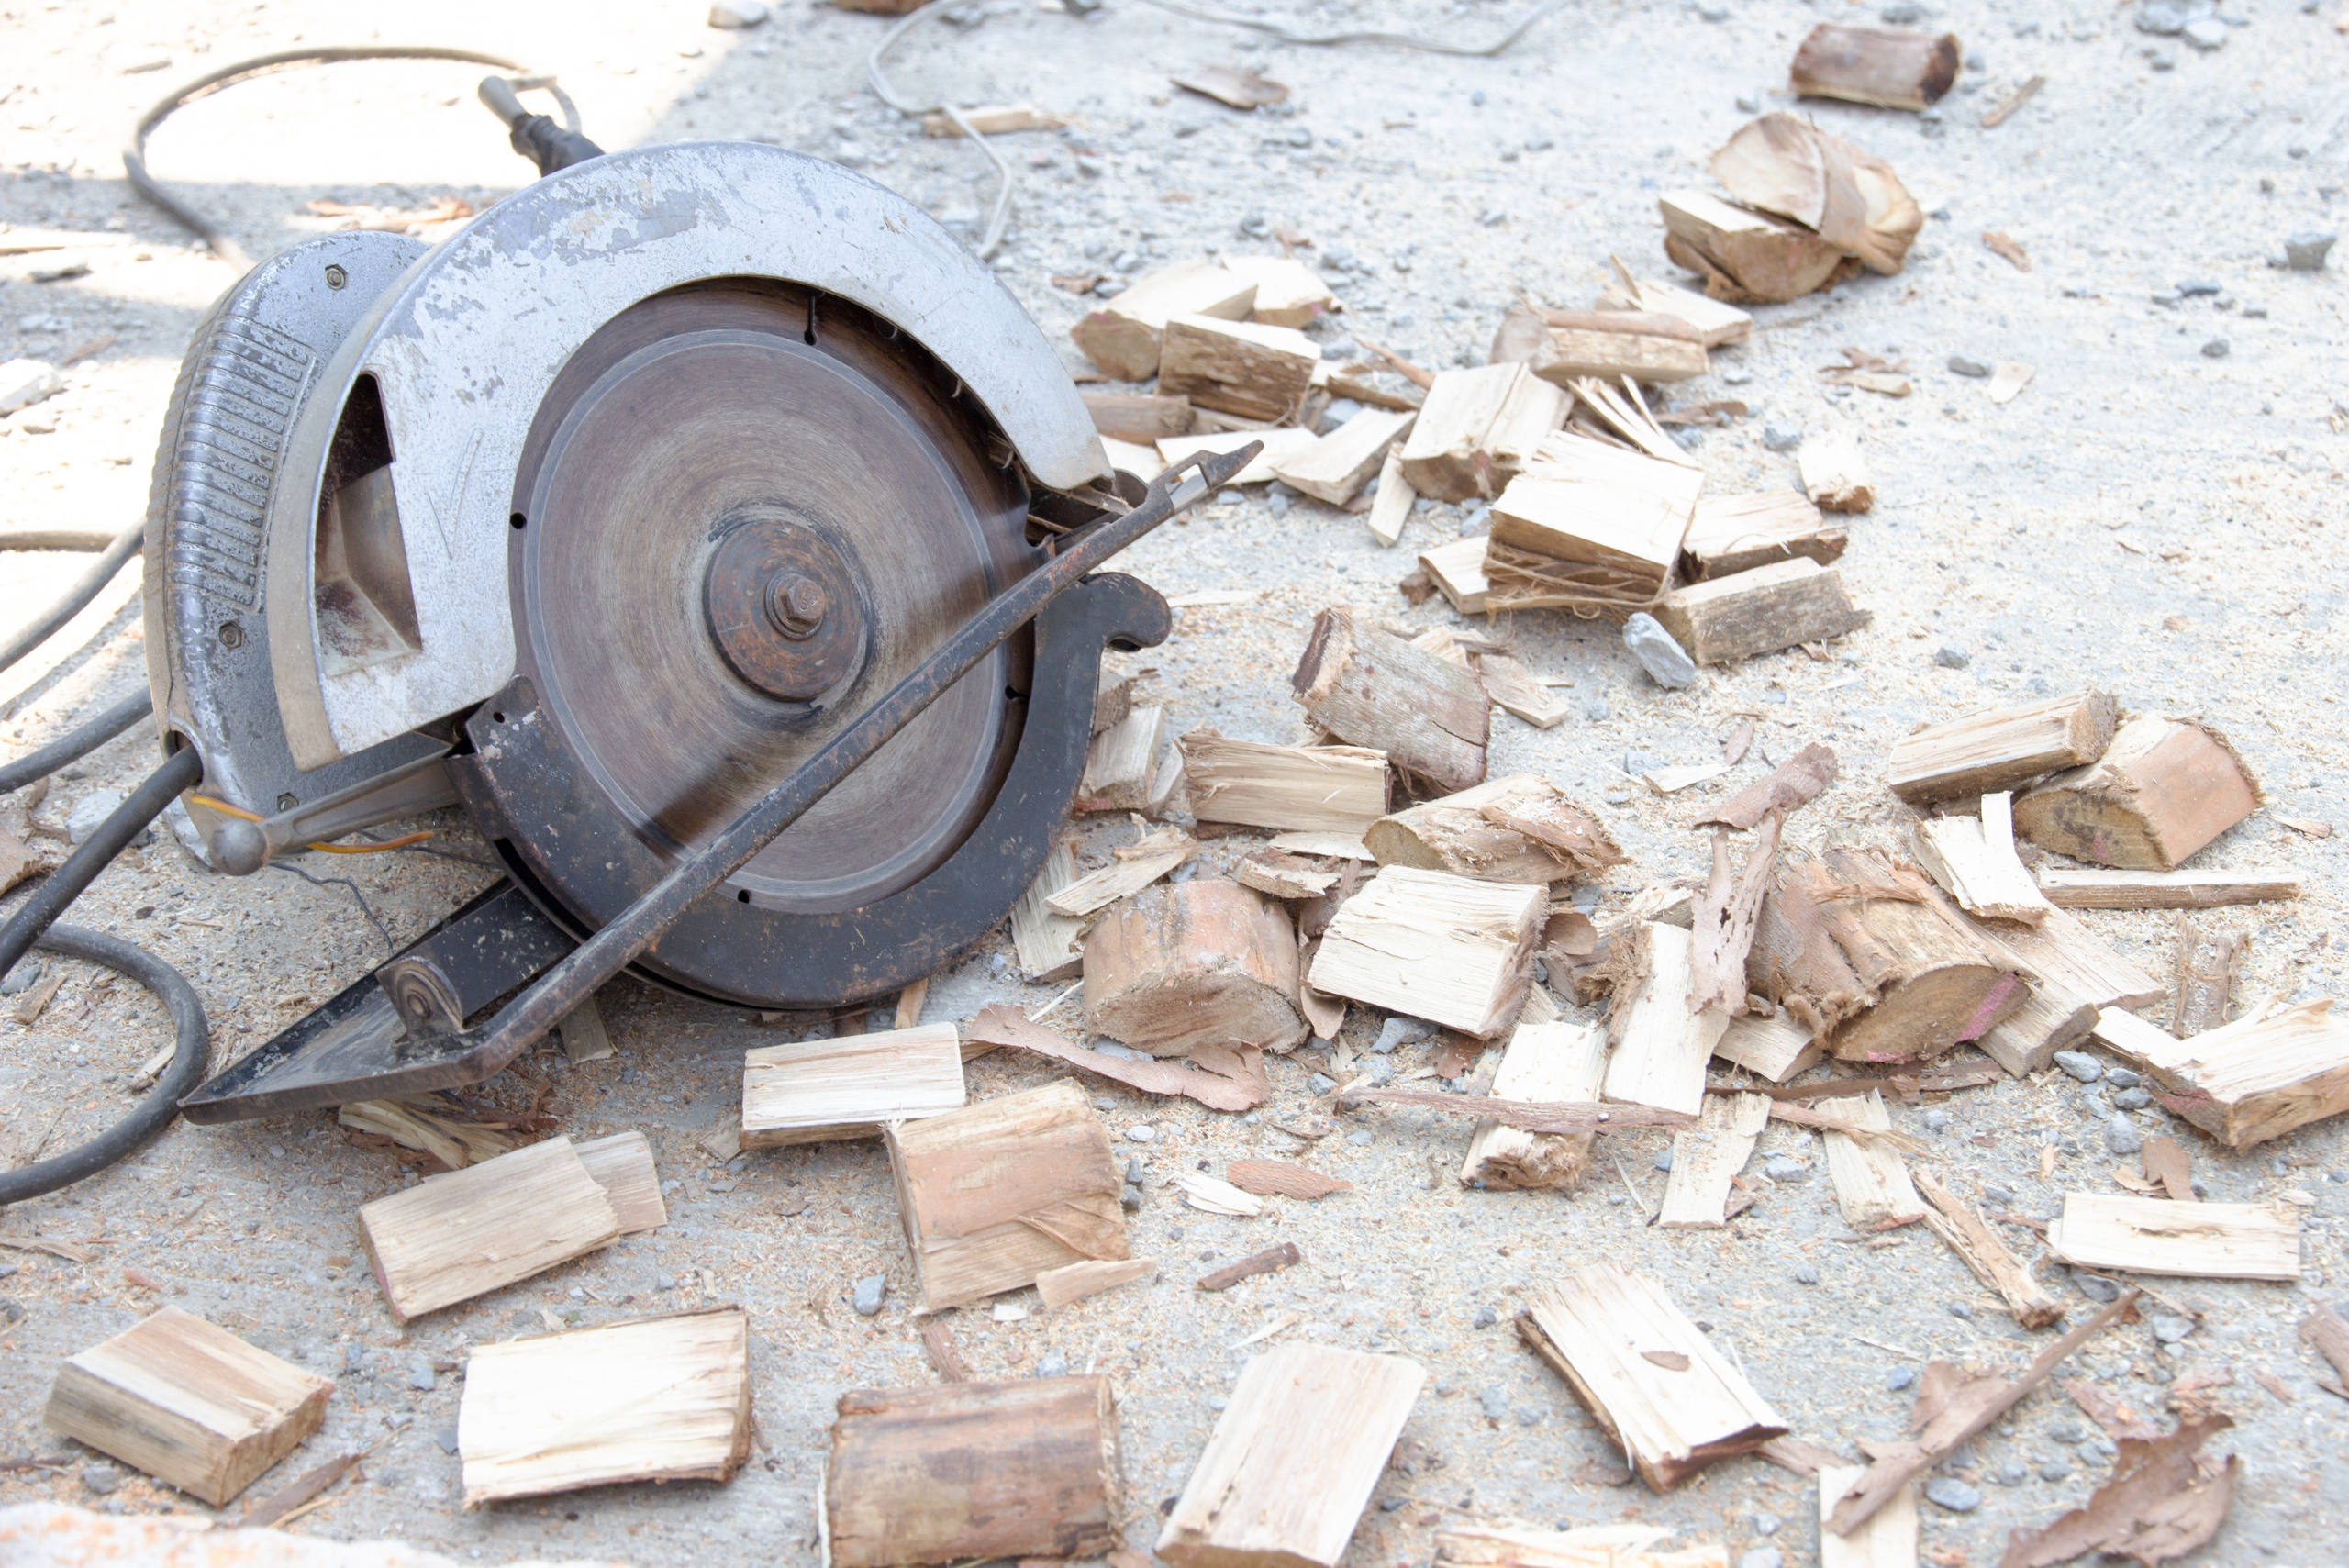 A circular saw on top of pieces of wood that were cut.